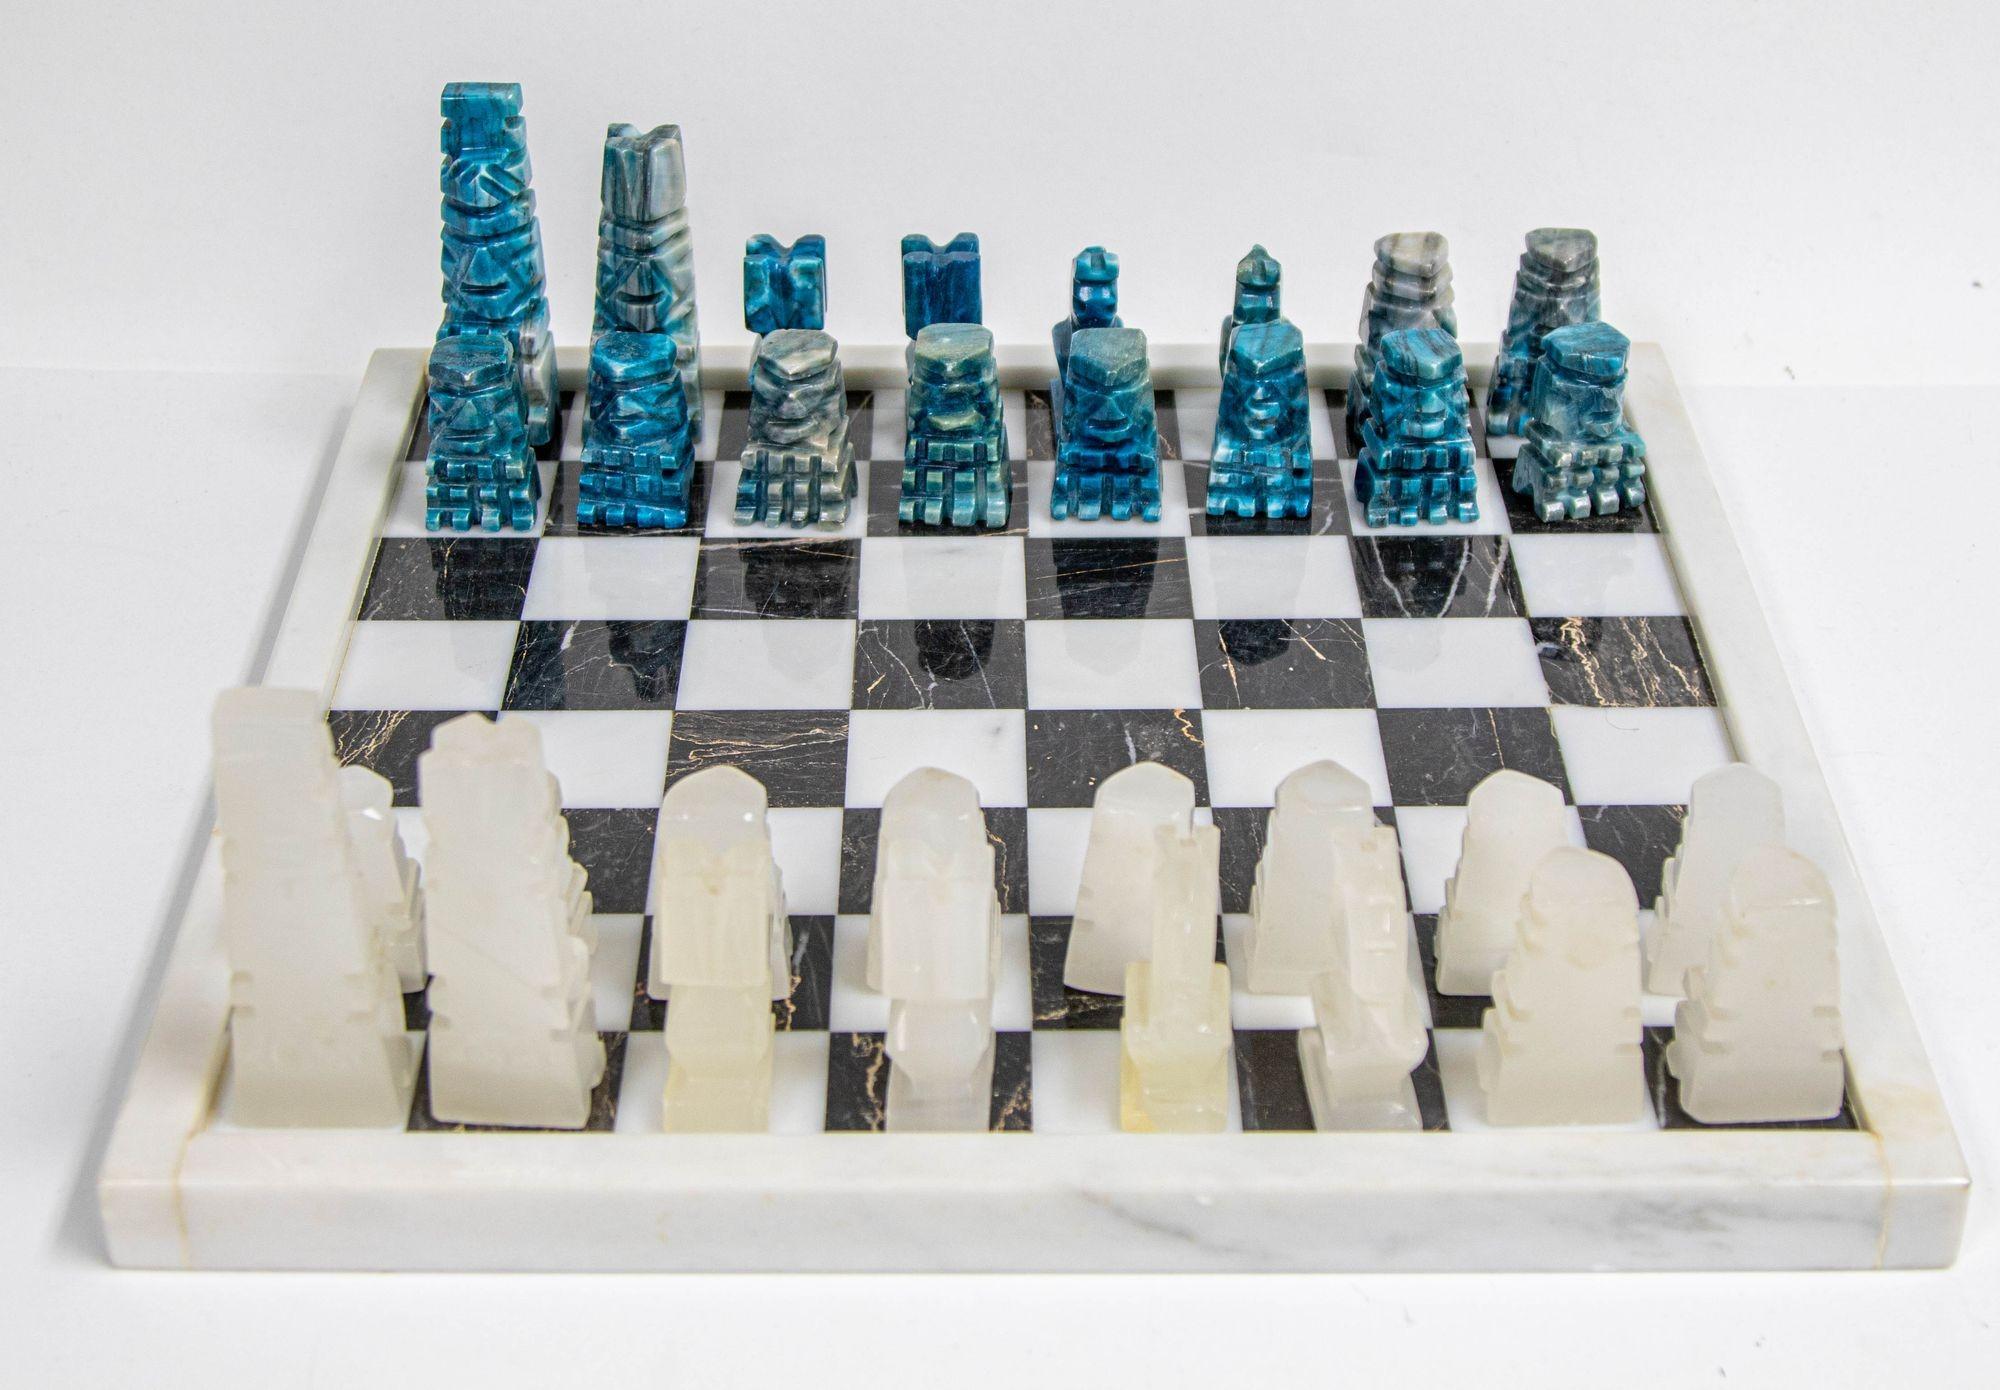 Vintage Marble Large Chess Set with hand carved Turquoise Onyx Pieces
Vintage mid 20th century Mexican stone marble chess set complete chess board in white and black marble stone with elaborately hand carved turquoise and white chess pieces.
The